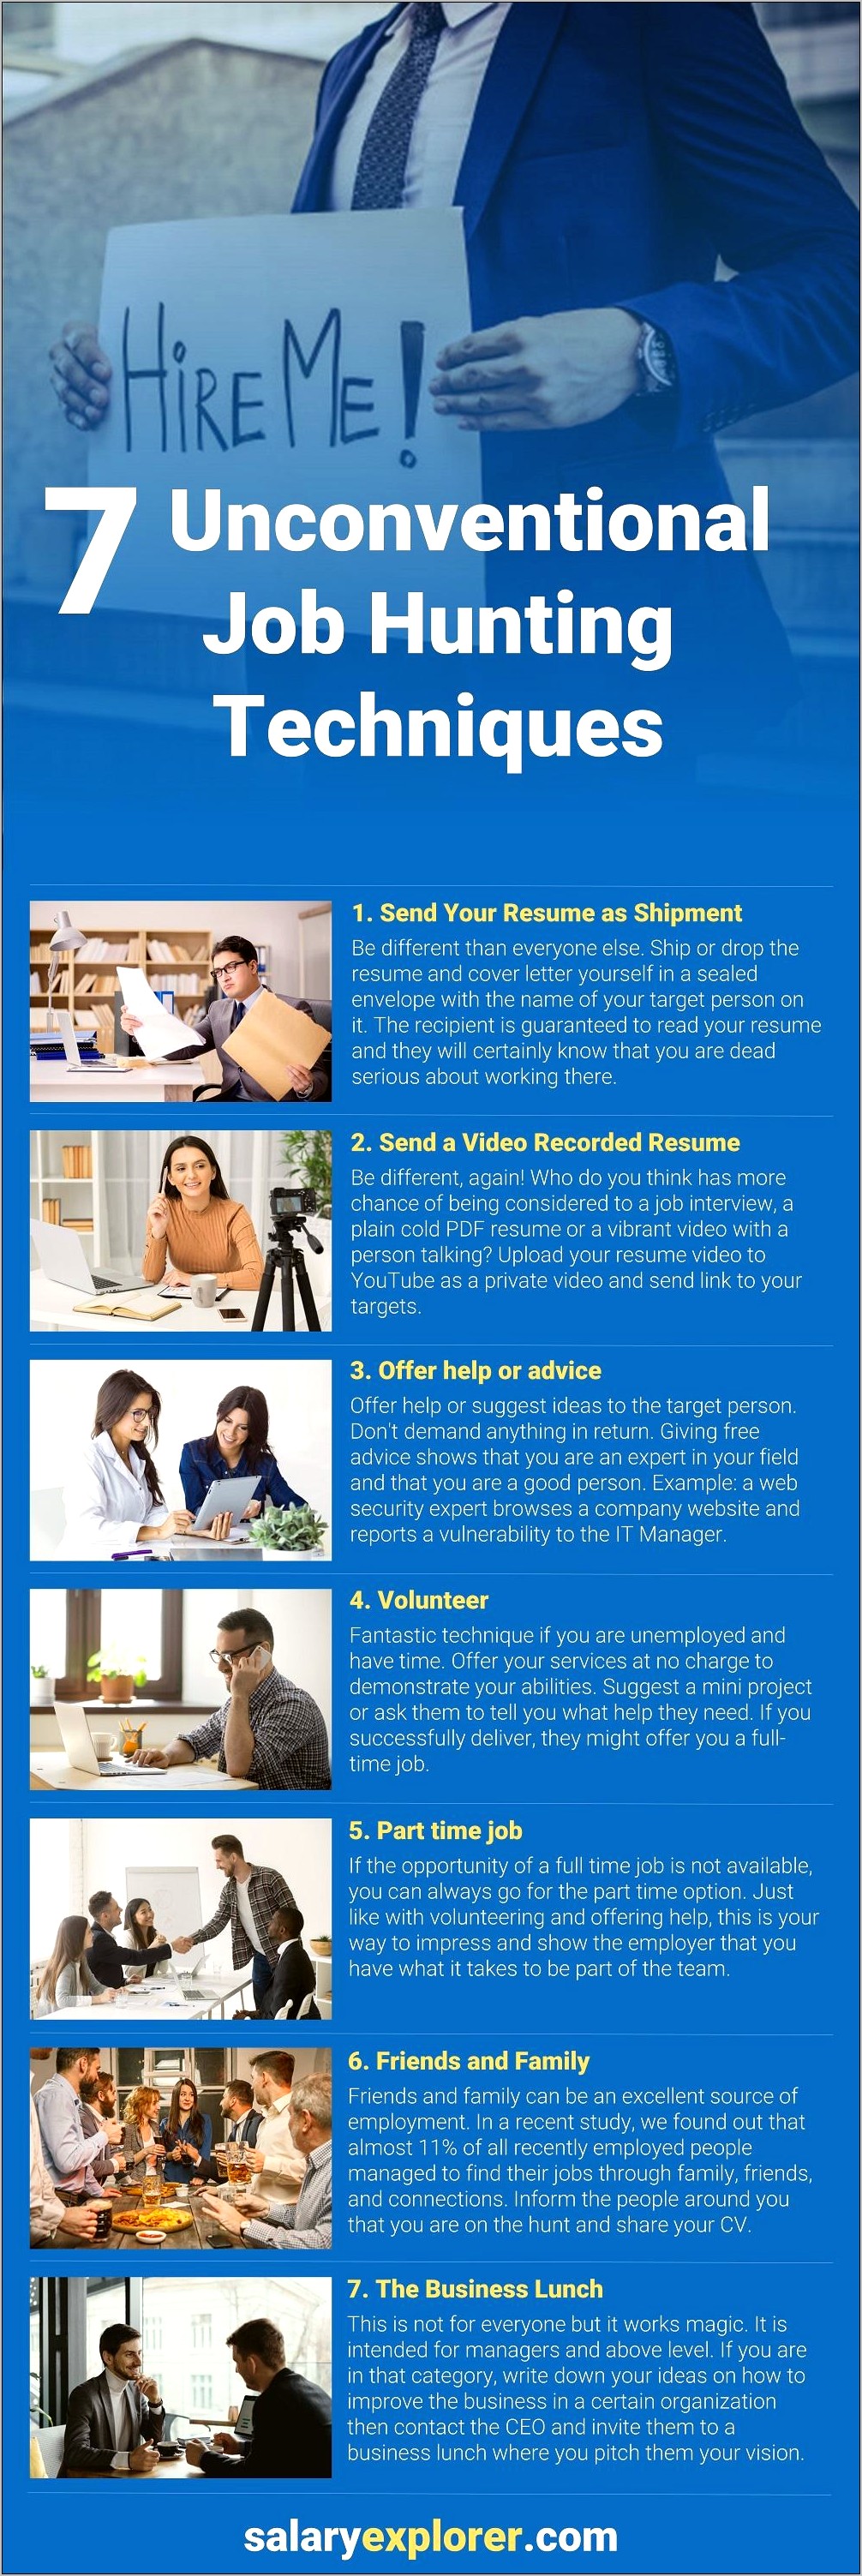 Should You Put Offered Jobs On Resume